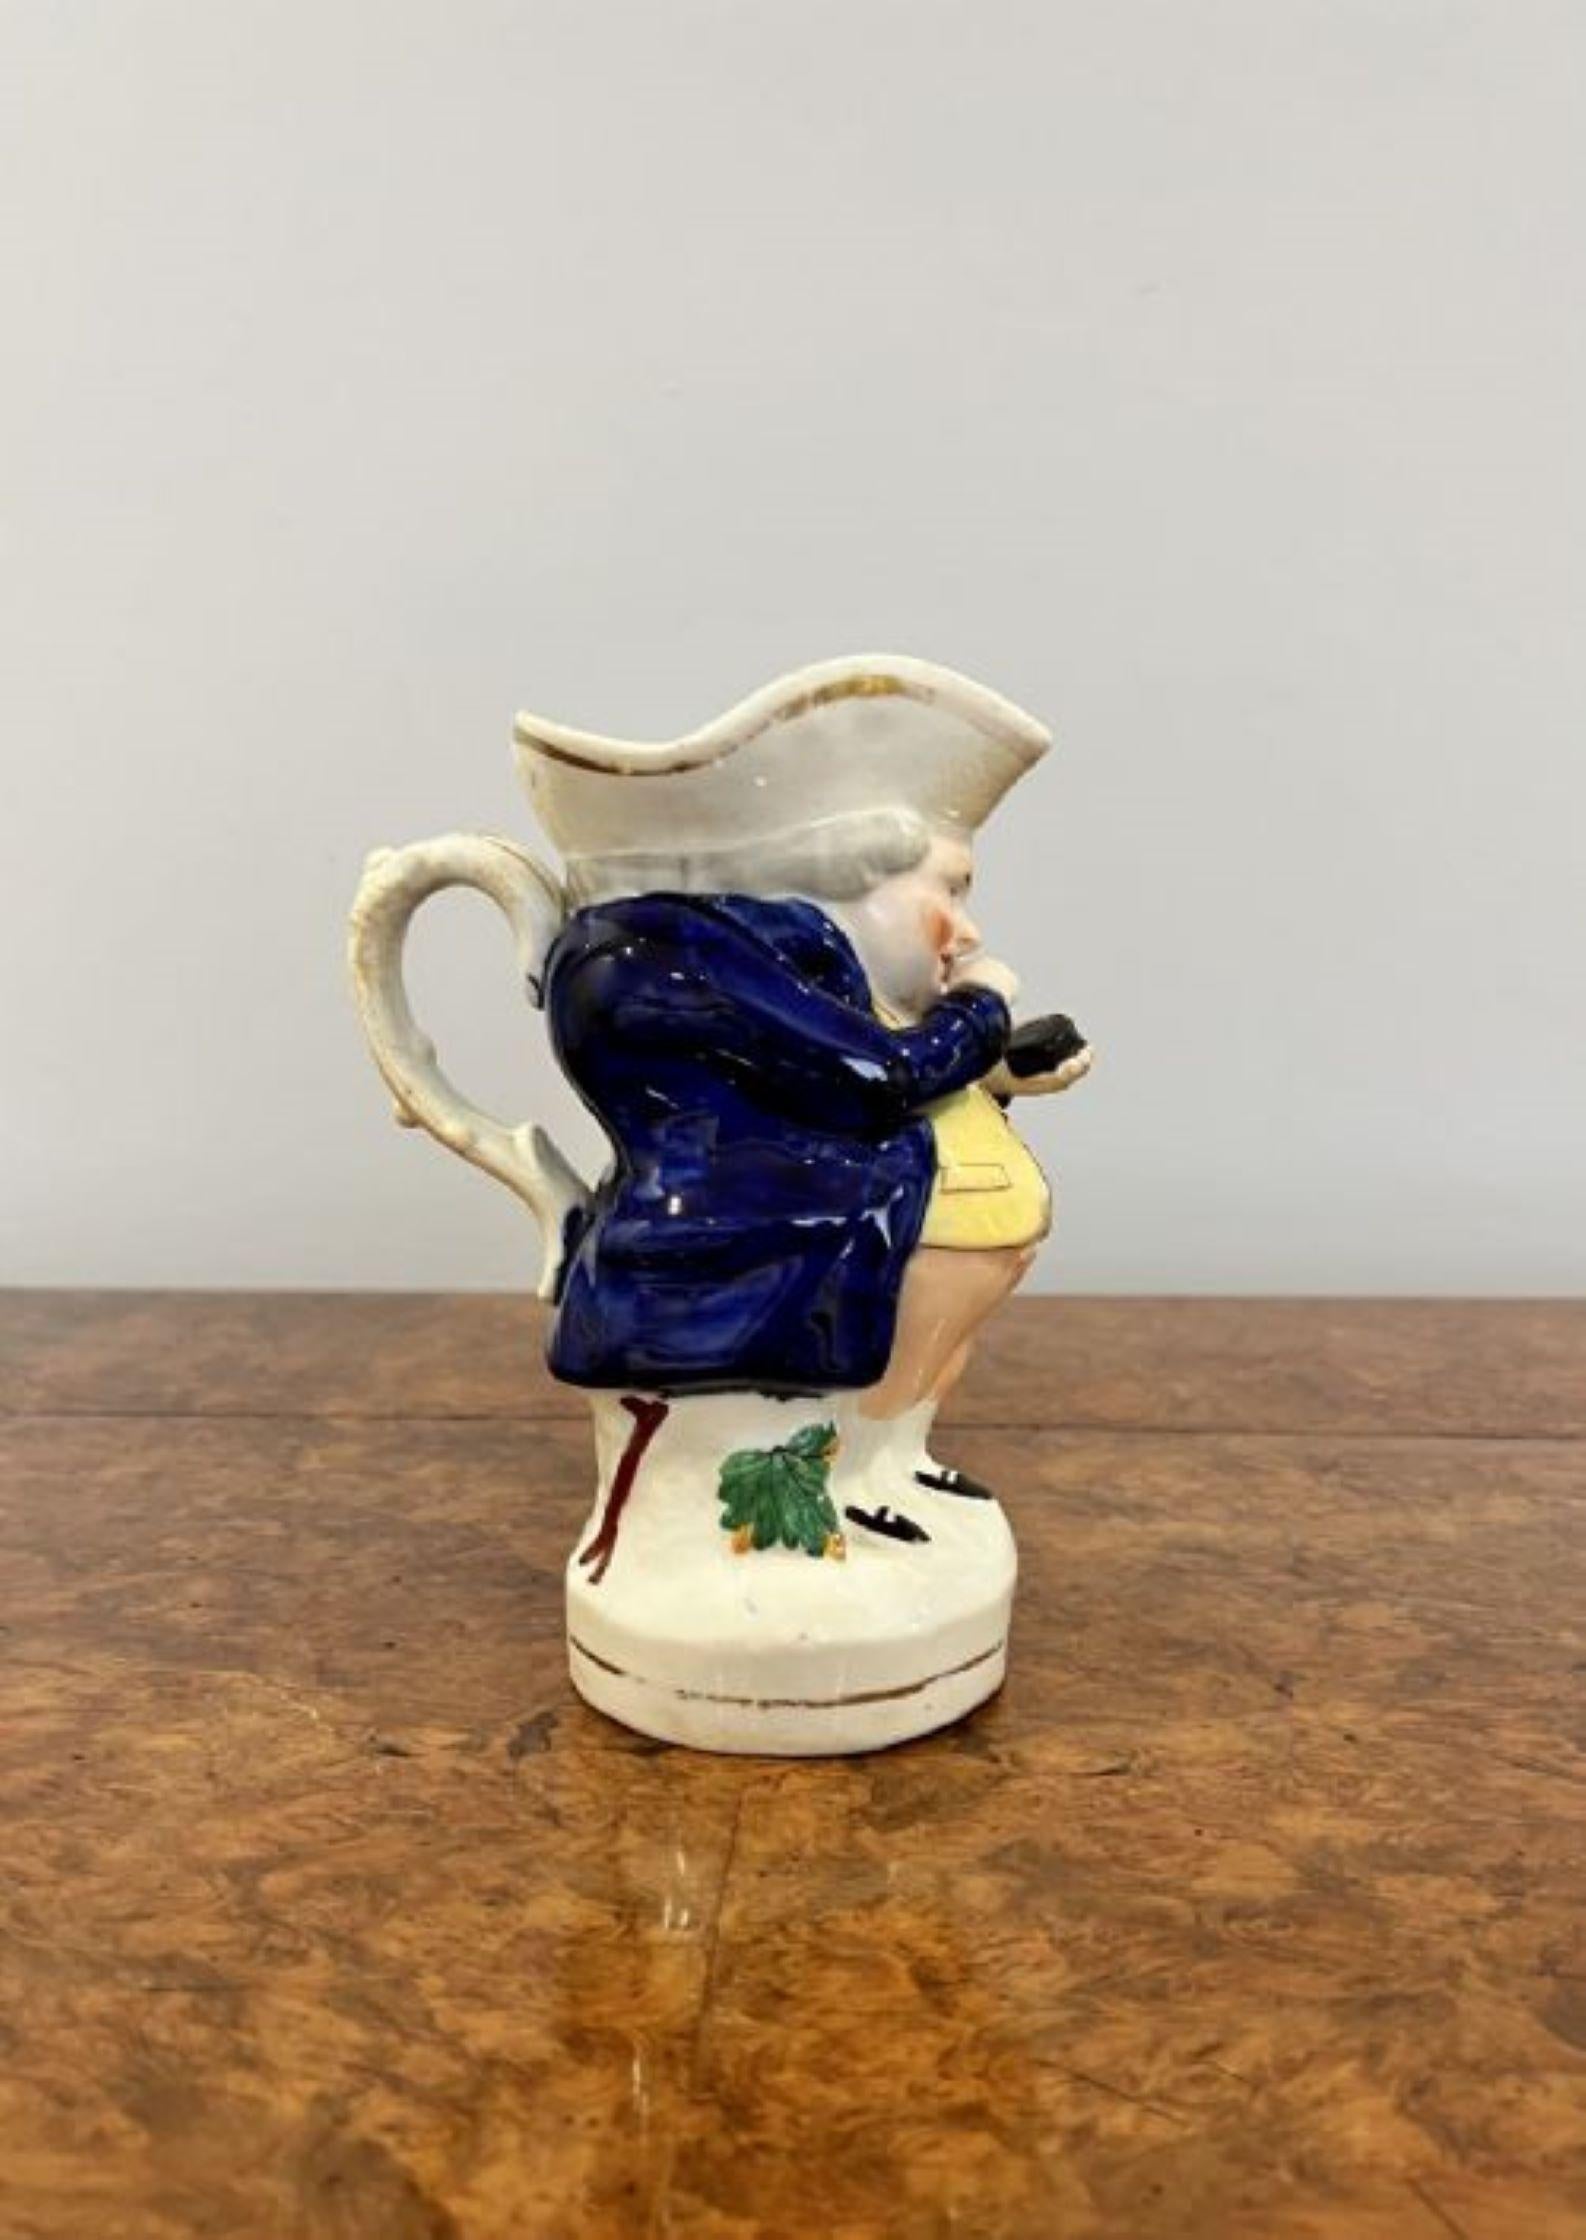 Quality antique Victorian Staffordshire toby jug of Mr Snuff having a quality antique Victorian toby jug of Mr Snuff in wonderful period clothing in blue, white, pink, green and black colours with gold gilding having a handle to the back standing on